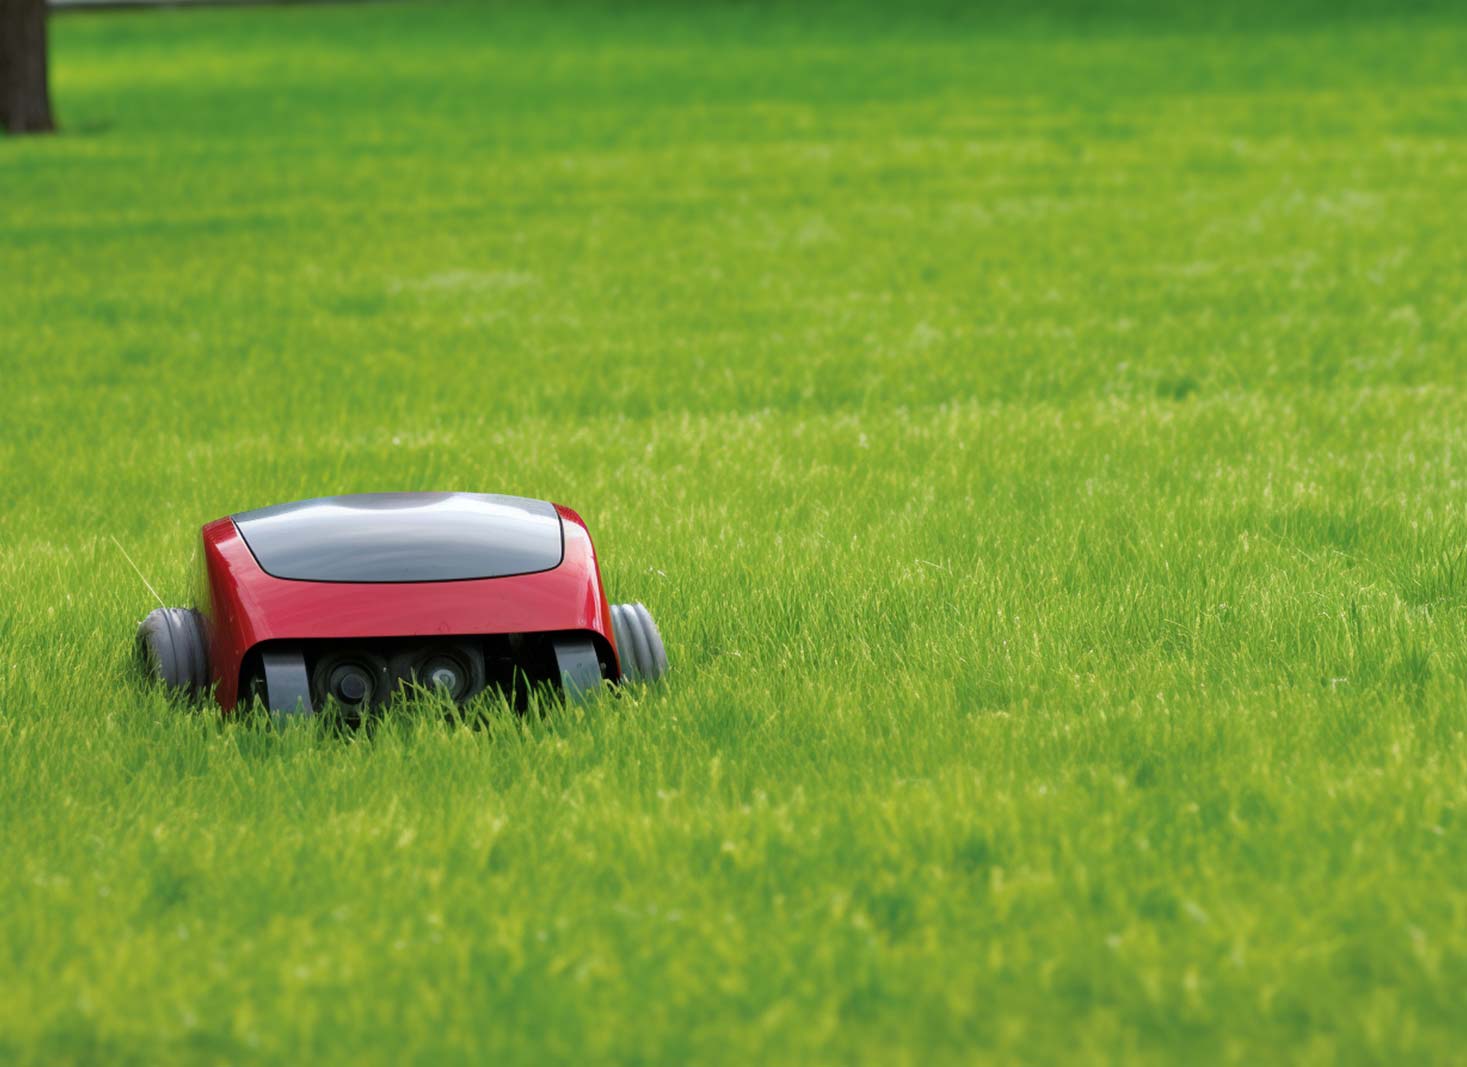 Role of Robotic Lawn Mowers in Weed Control